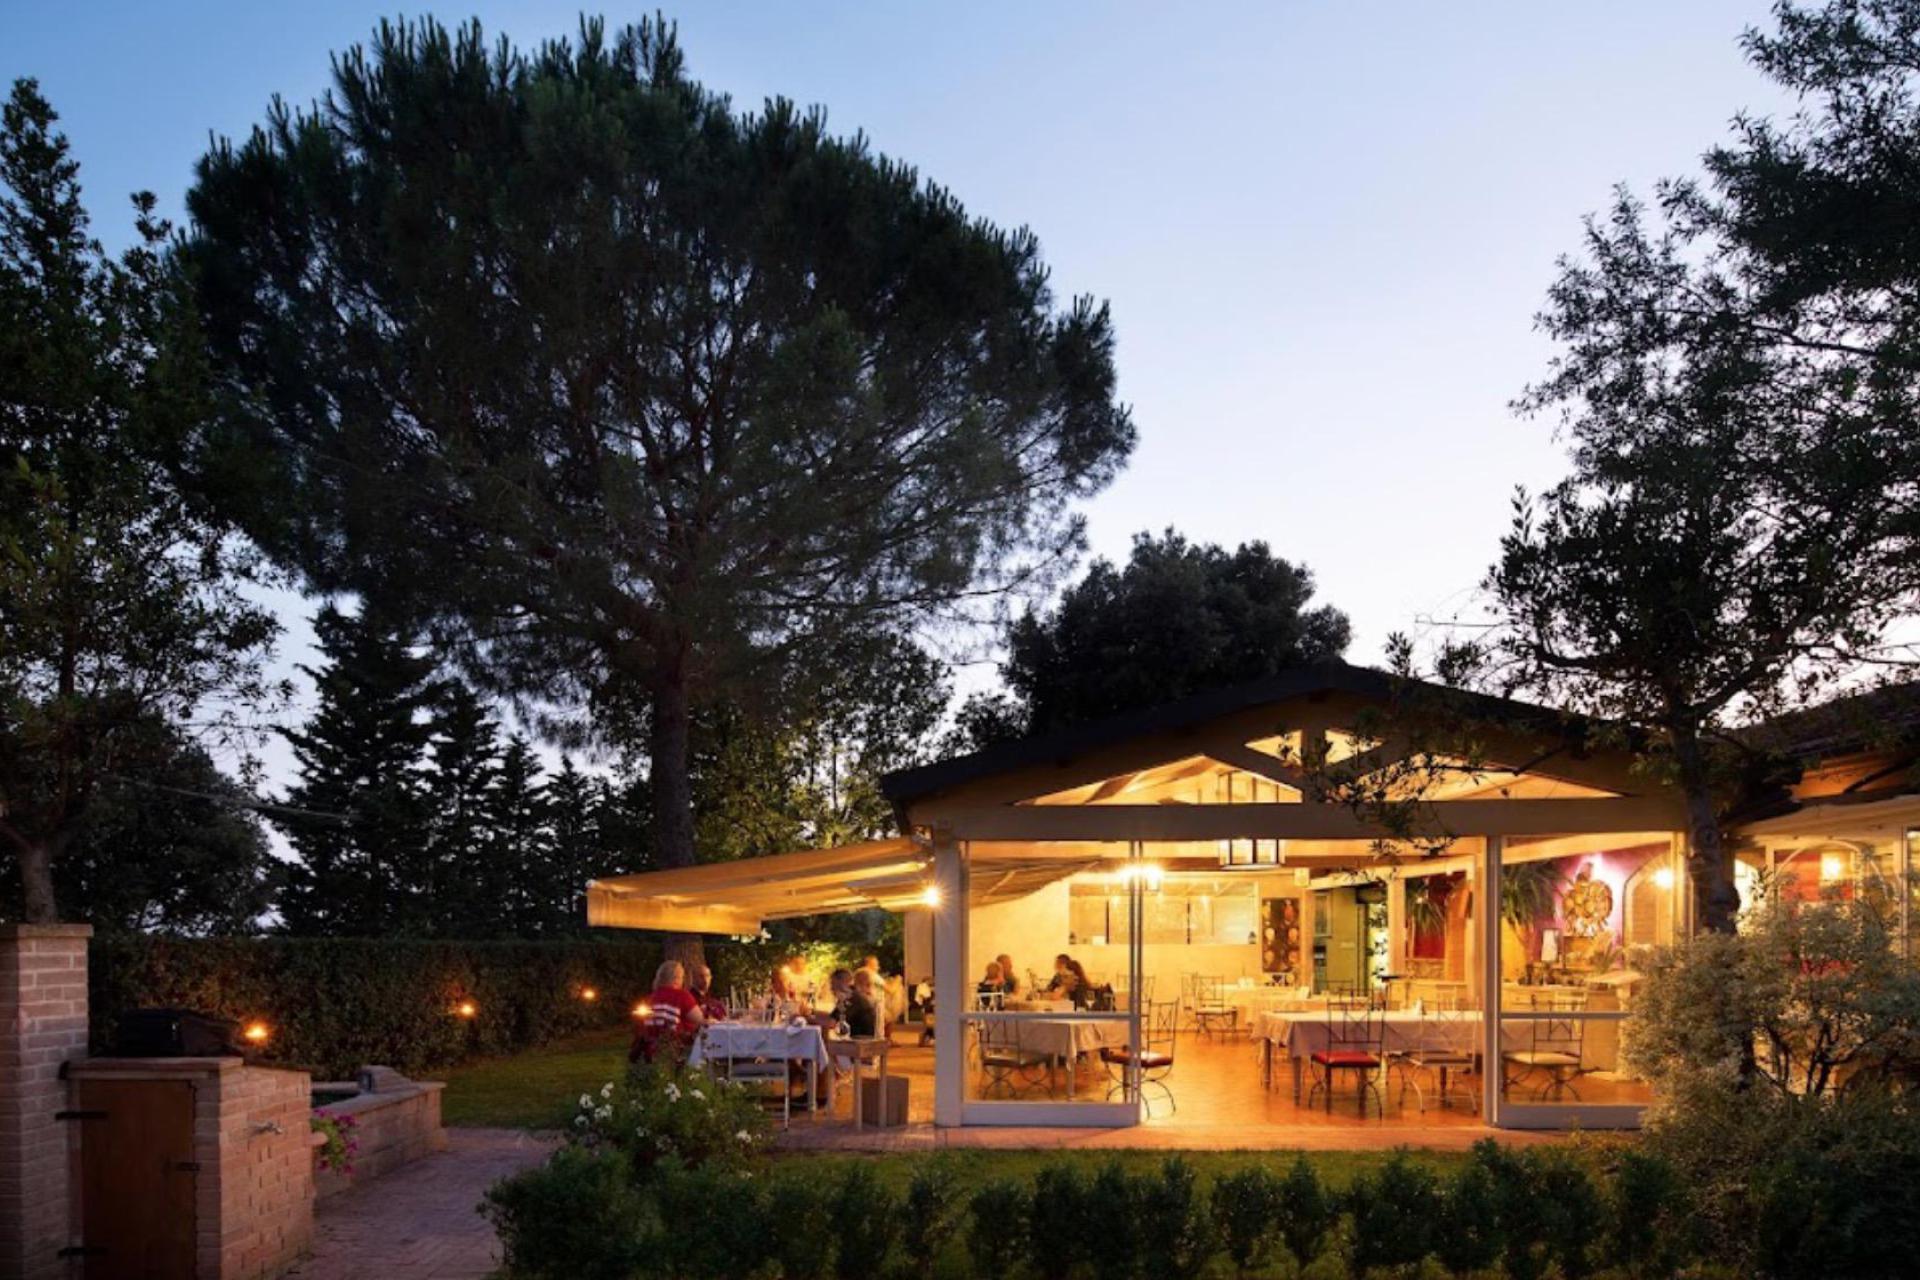 Agriturismo with restaurant near the Tuscan coast